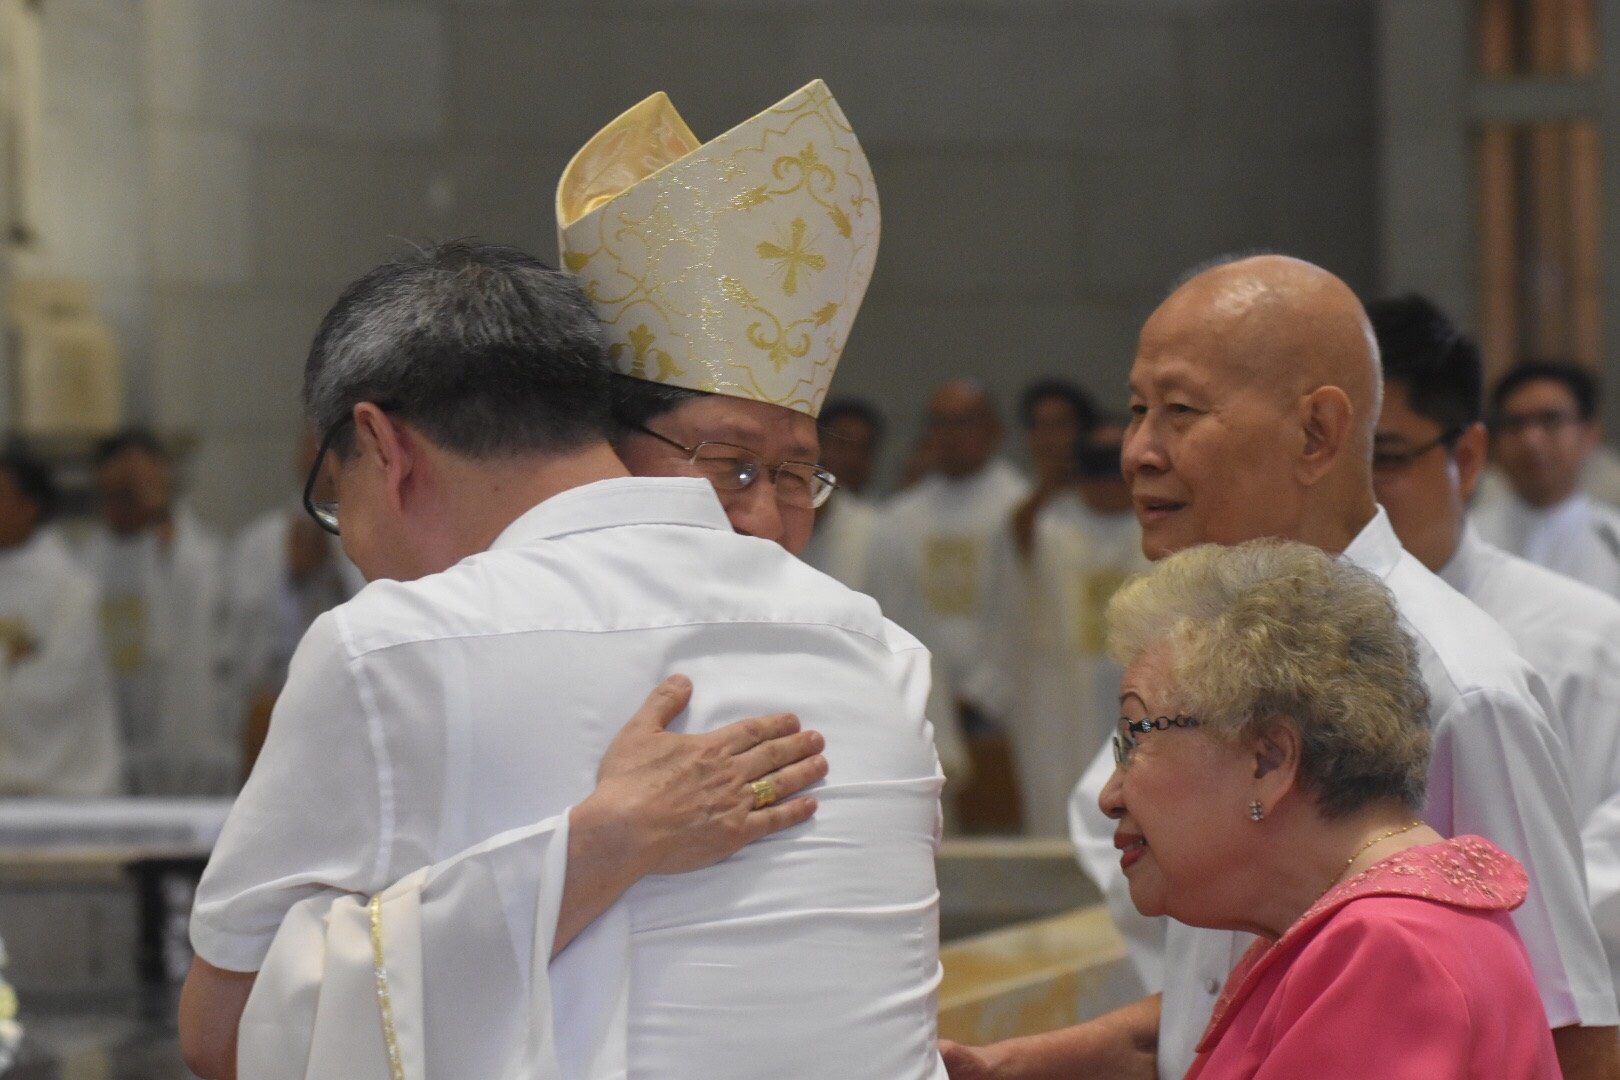 COVID-19 prevents Tagle from visiting elderly parents in Cavite